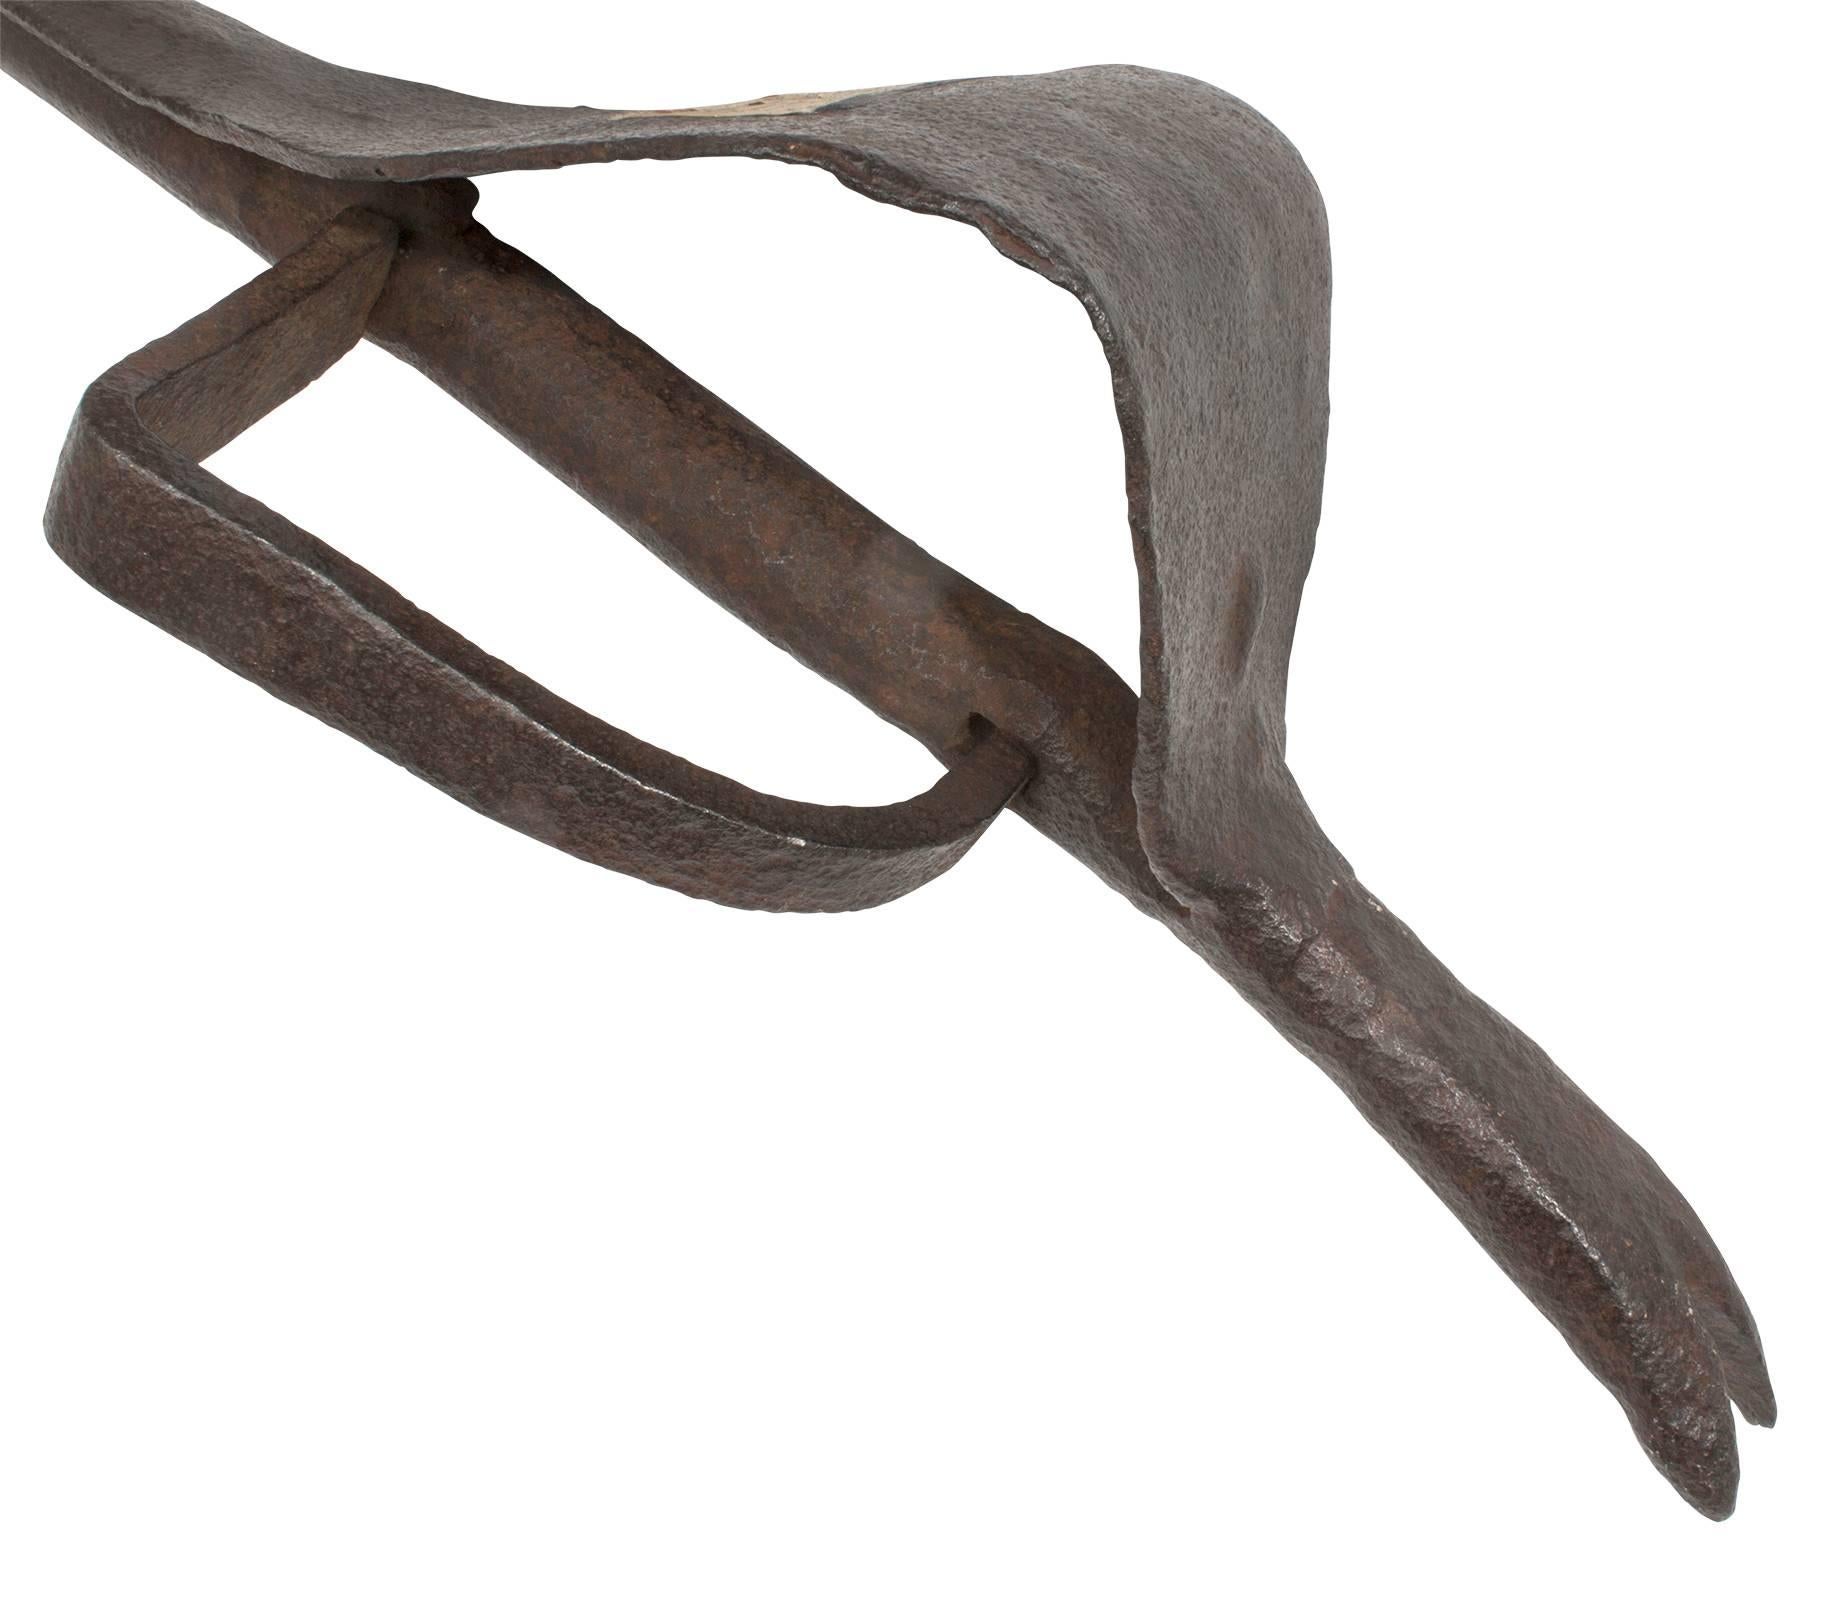 Early 19th Century 19th Century Hand-Wrought Iron Tool